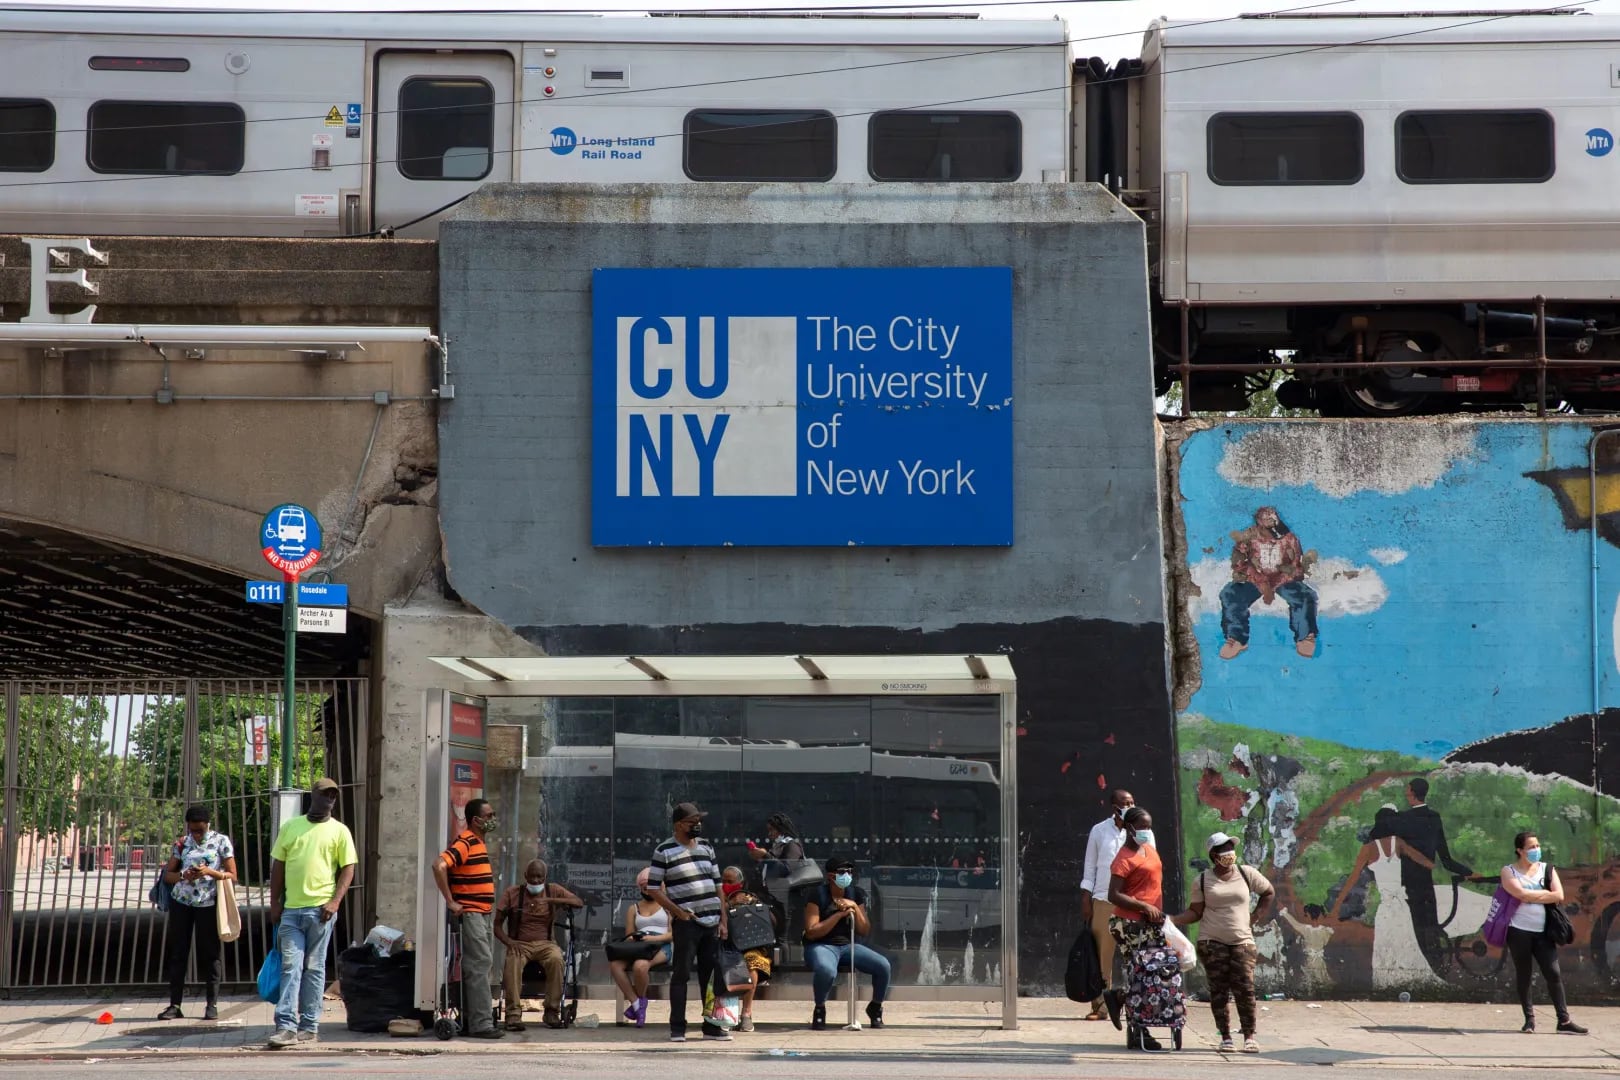 A sign for a CUNY campus with NYC silver subway trains running above ground over it.